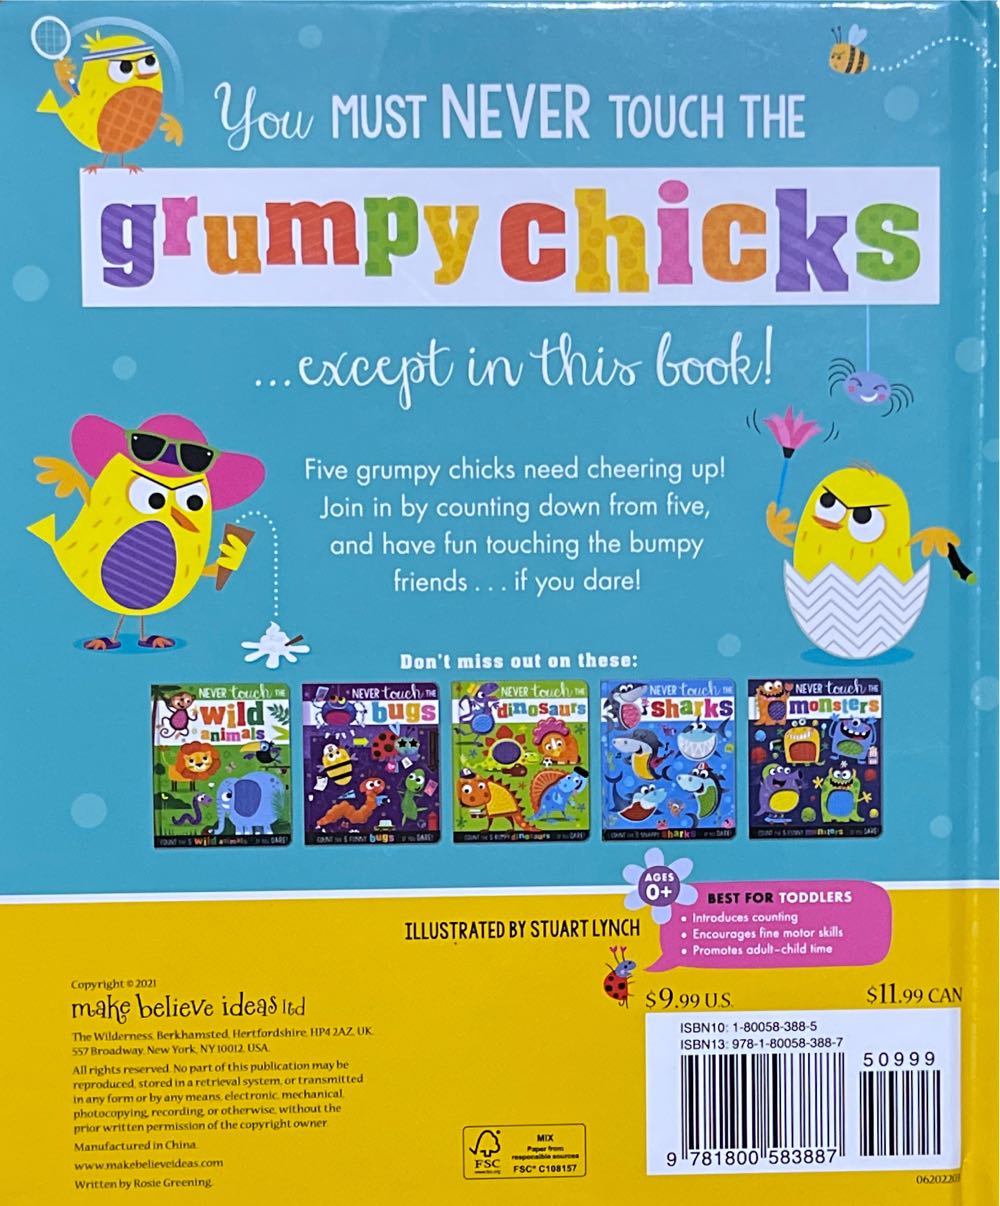 Never Touch the Grumpy Chicks - Rosie Greening book collectible [Barcode 9781800583887] - Main Image 2